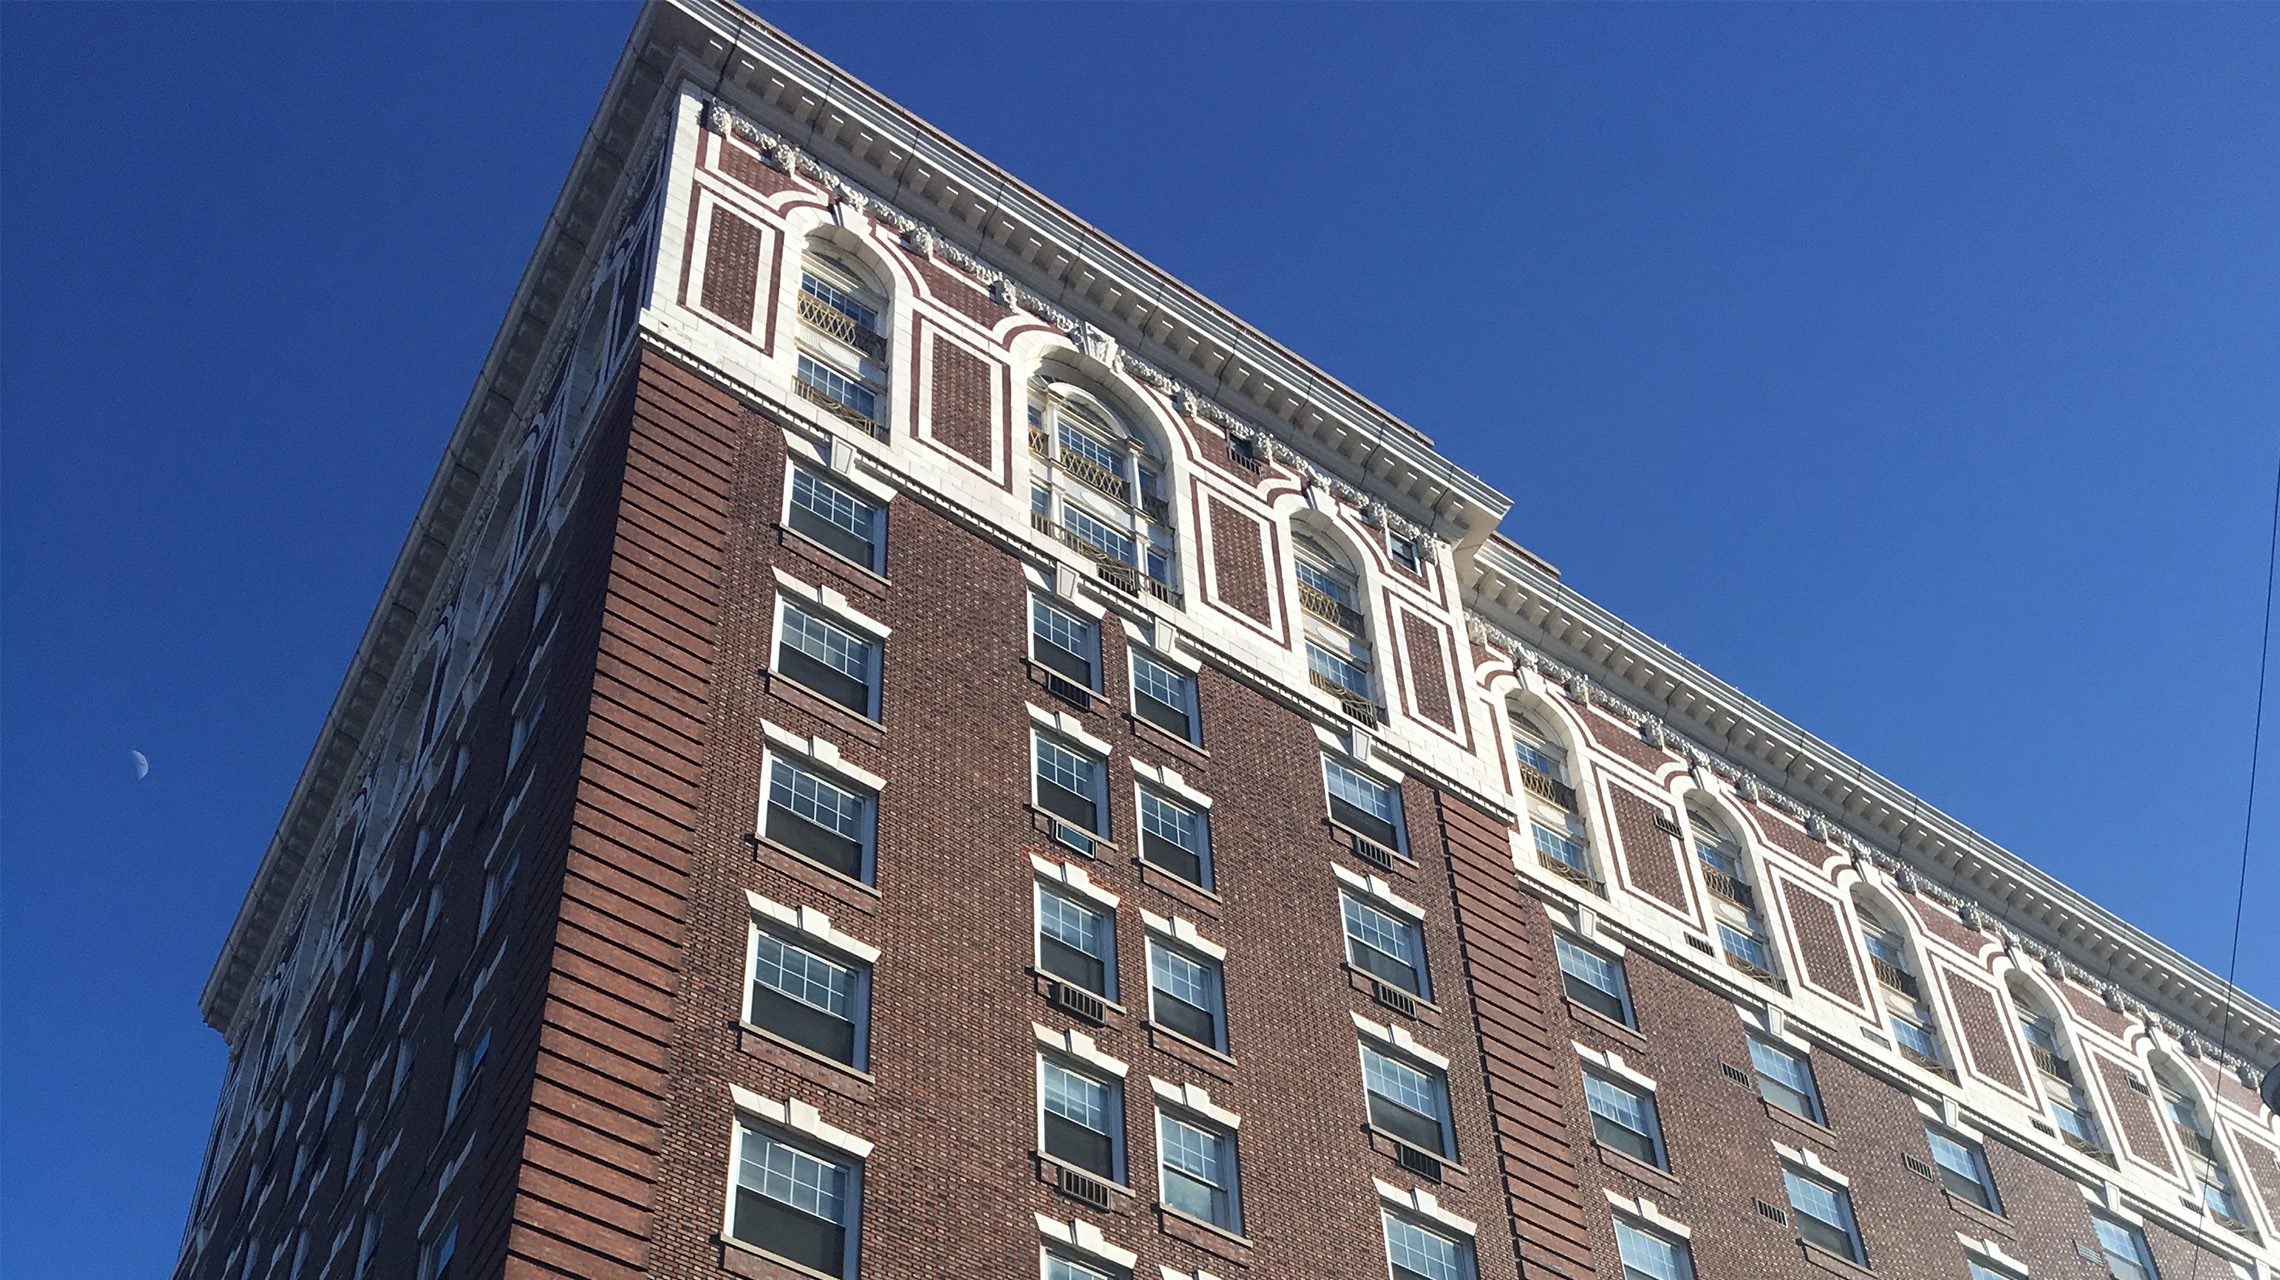 The Taft Apartments in New Haven following terra cotta restoration